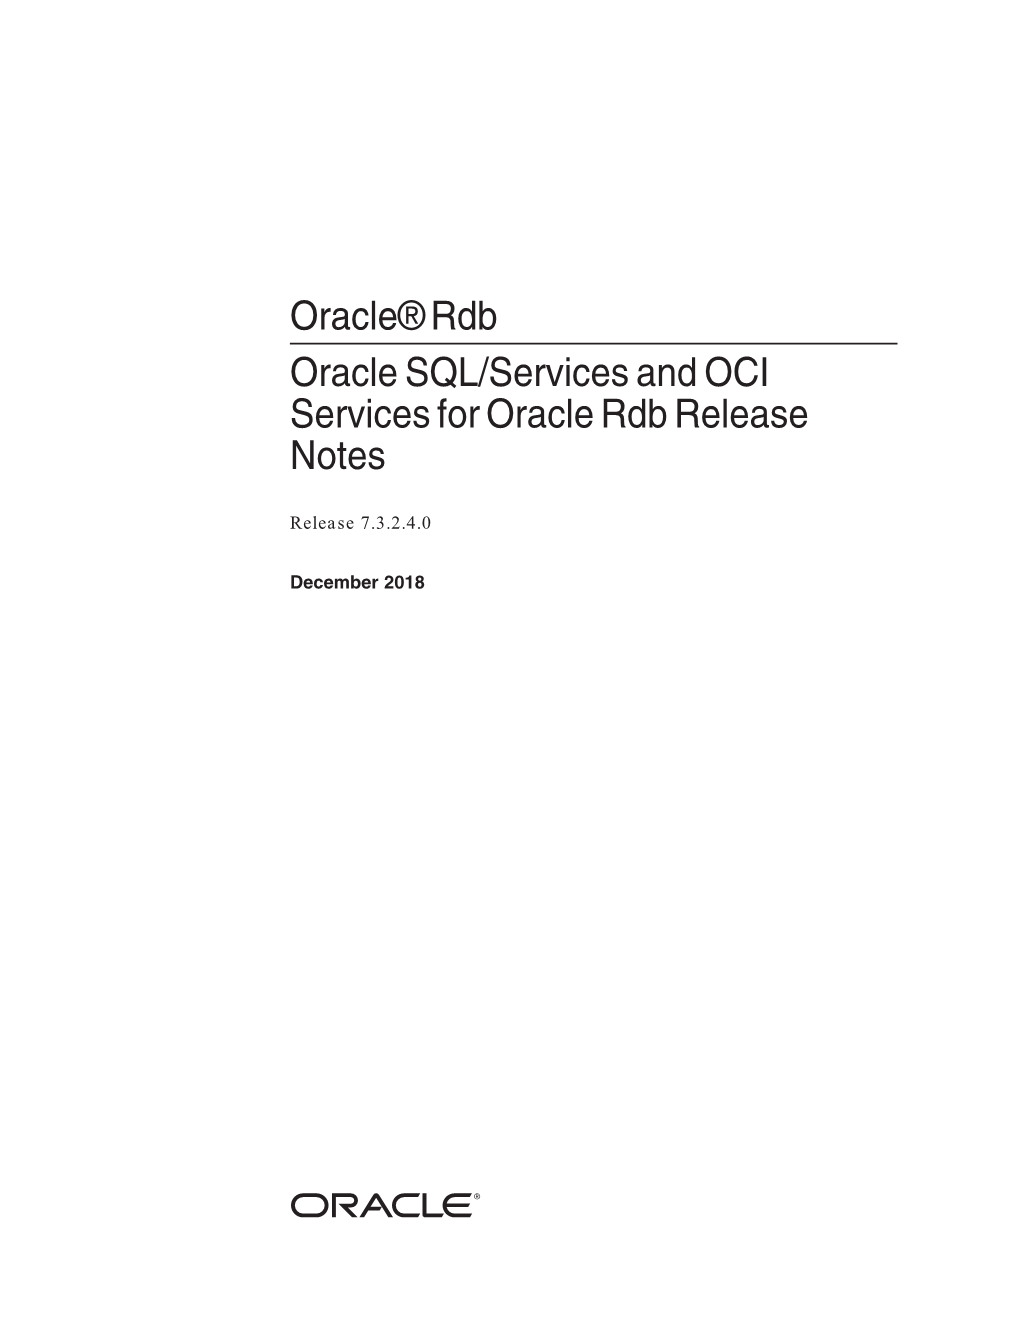 Oracle® Rdb Oracle SQL/Services and OCI Services for Oracle Rdb Release Notes